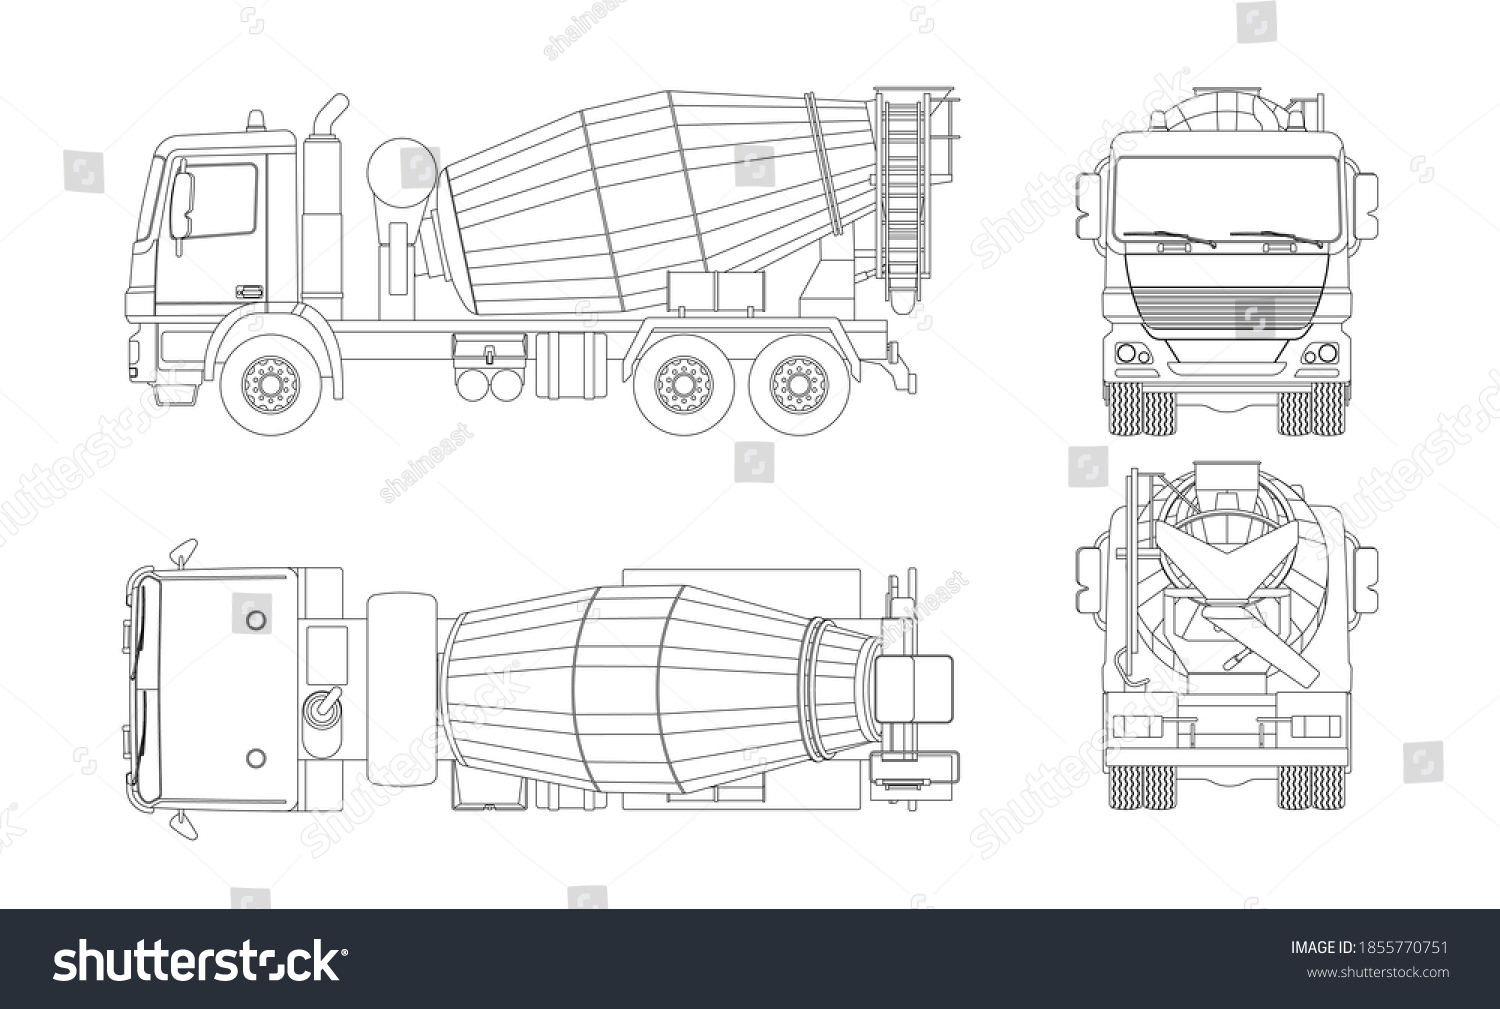 SVG of Outline concrete mixer truck. Side, top, front and back views. Isolated lorry blueprint. Industrial drawing. Construction vehicle for build. Vector illustration svg